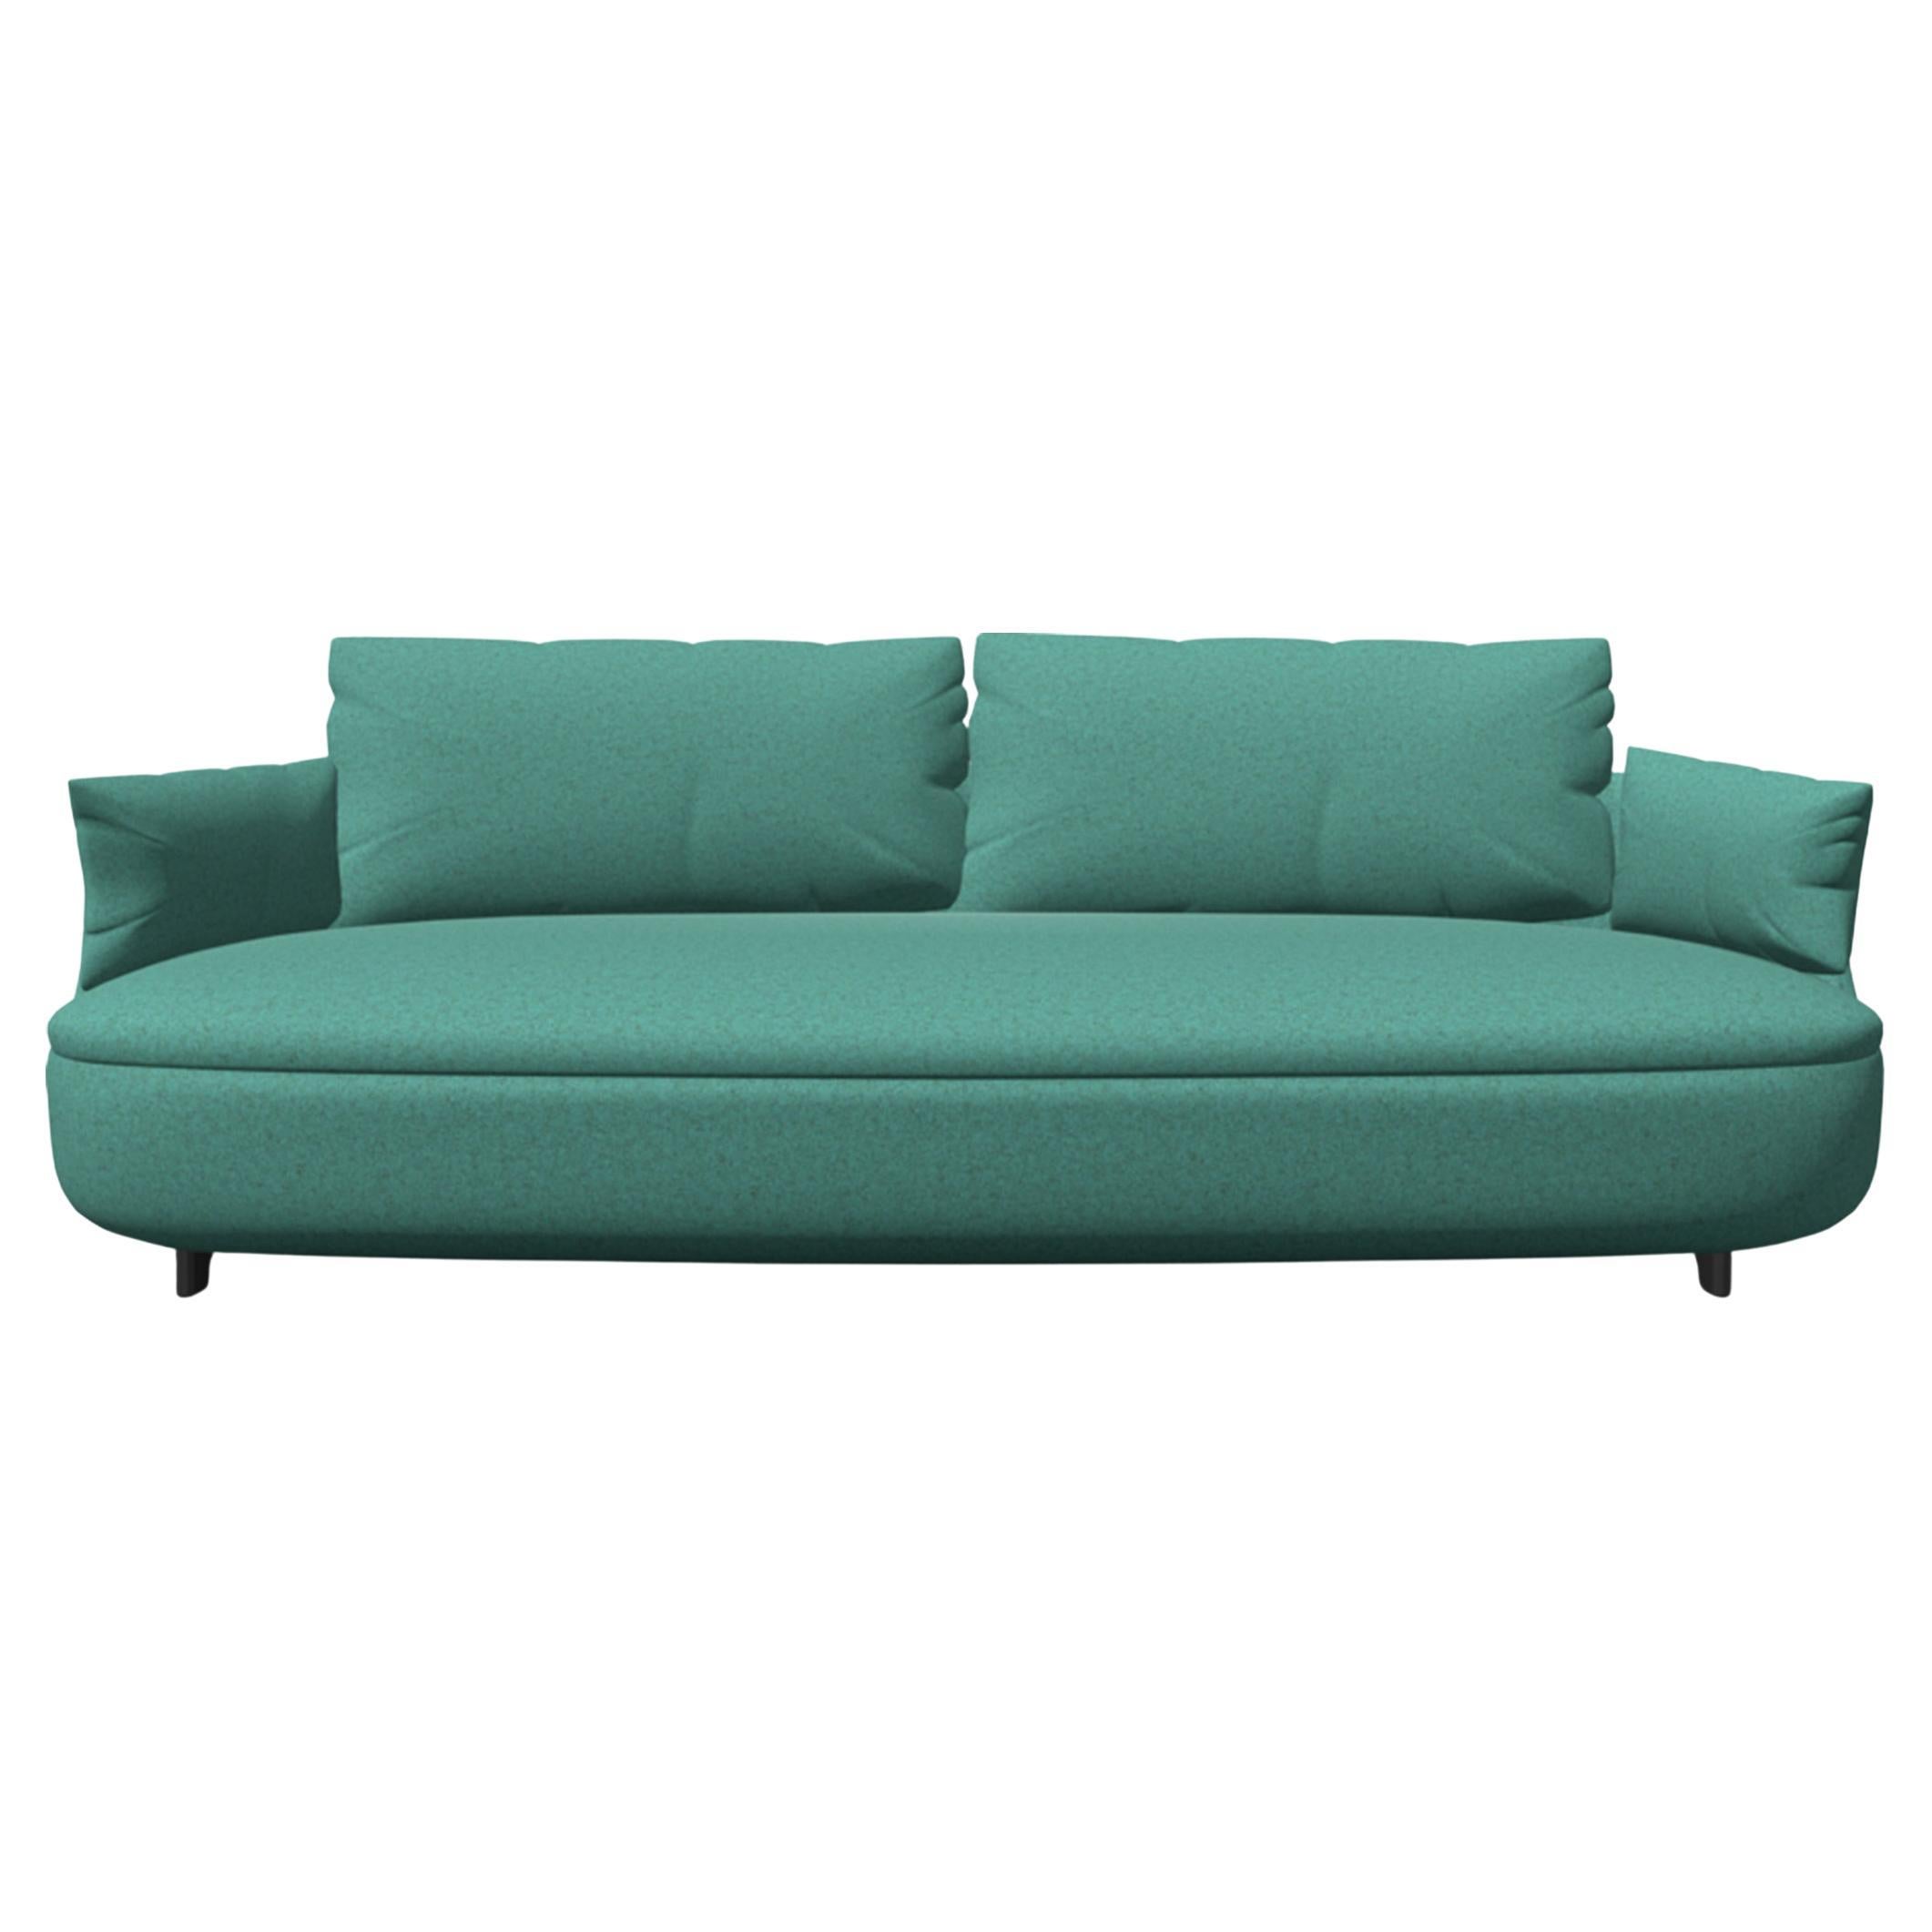 Moooi Bart Canape Sofa in Tonica 2, 933 Green Upholstery For Sale at 1stDibs